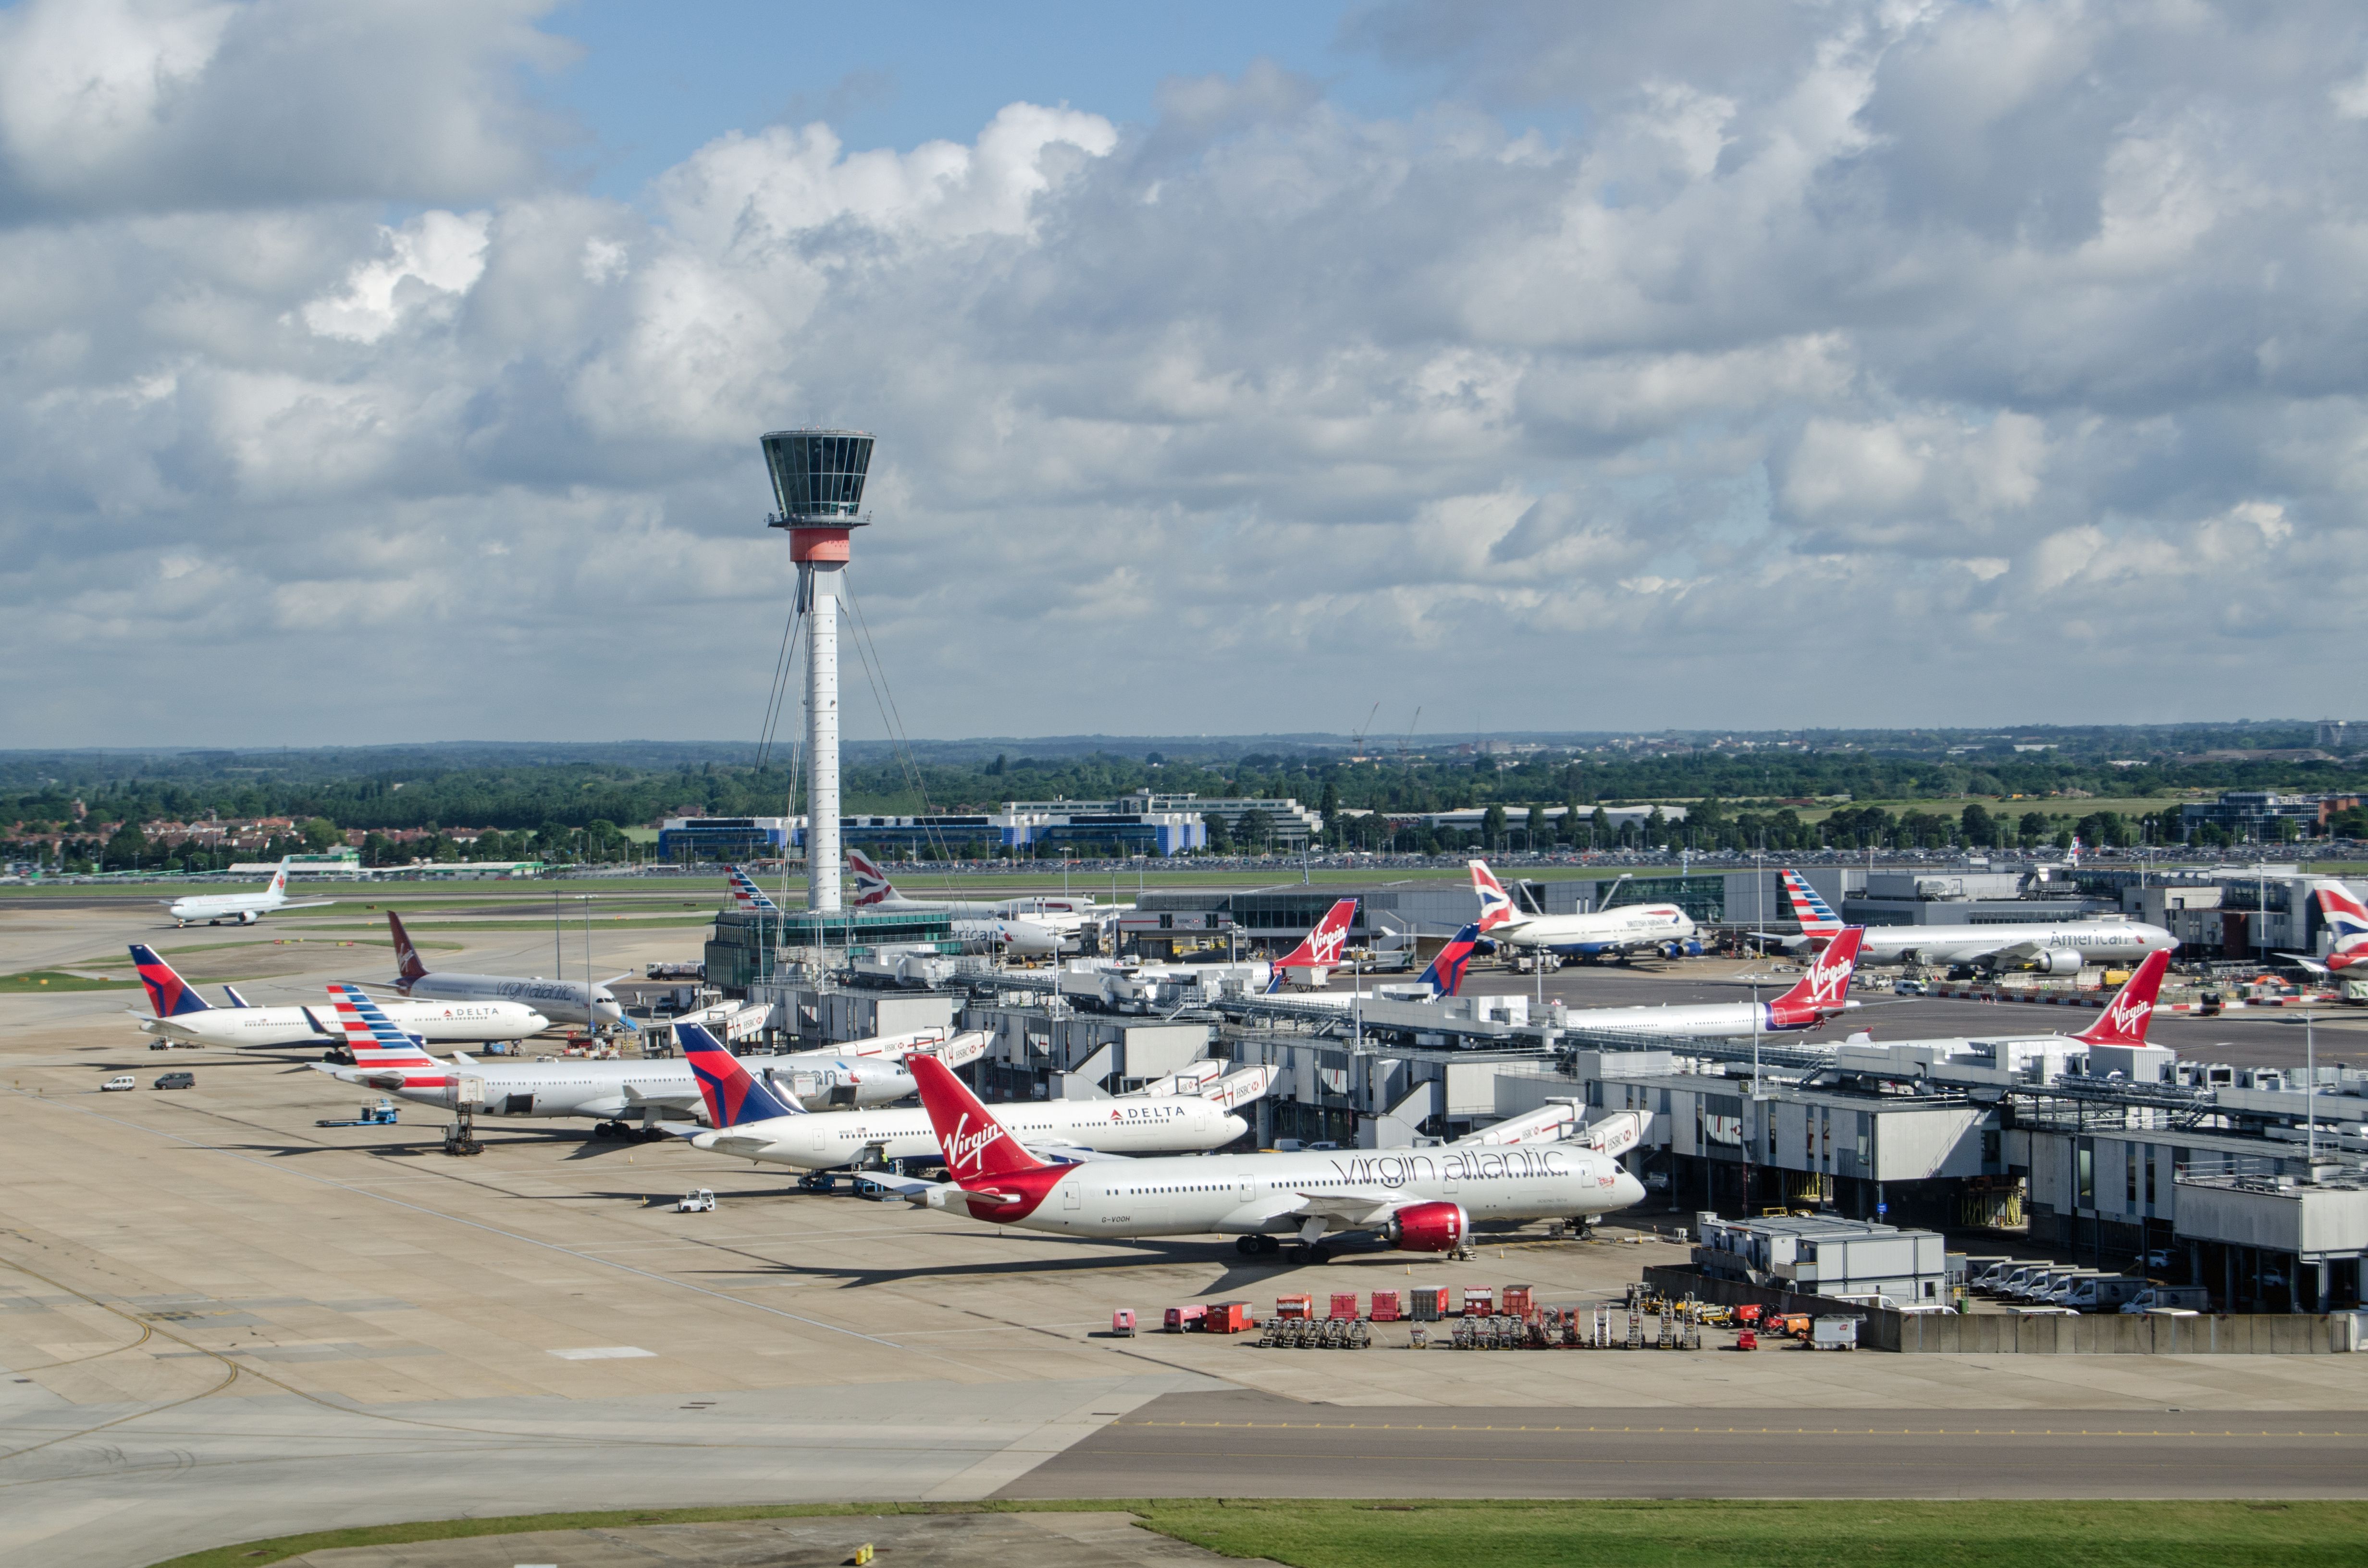 Several Virgin Atlantic and other aircraft parked at Terminal 3 of London's Heathrow Airport.